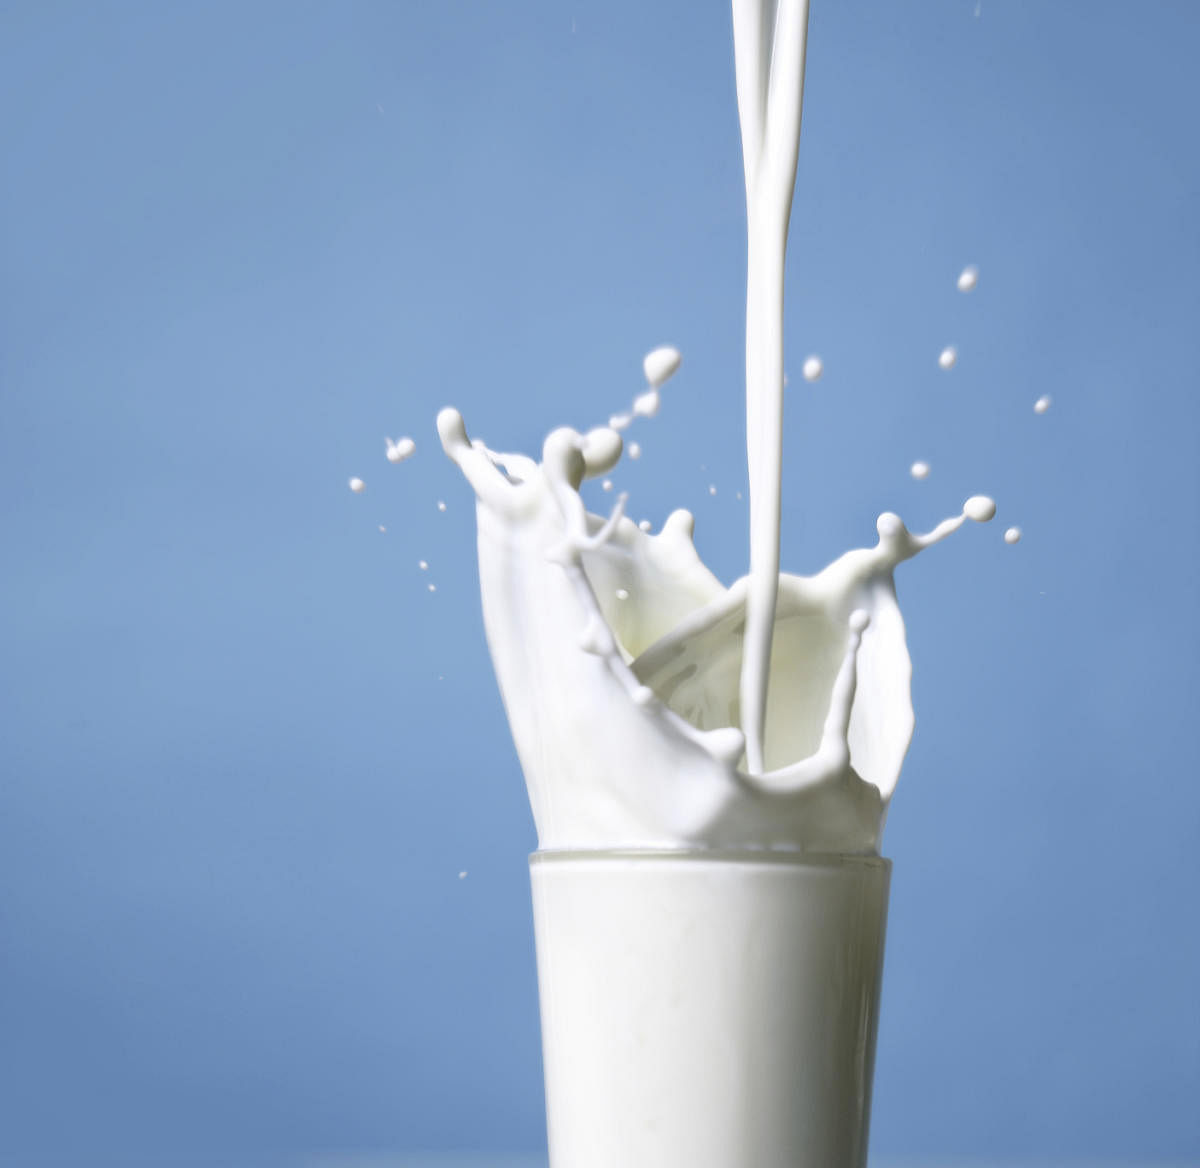 Milk prices and inflation